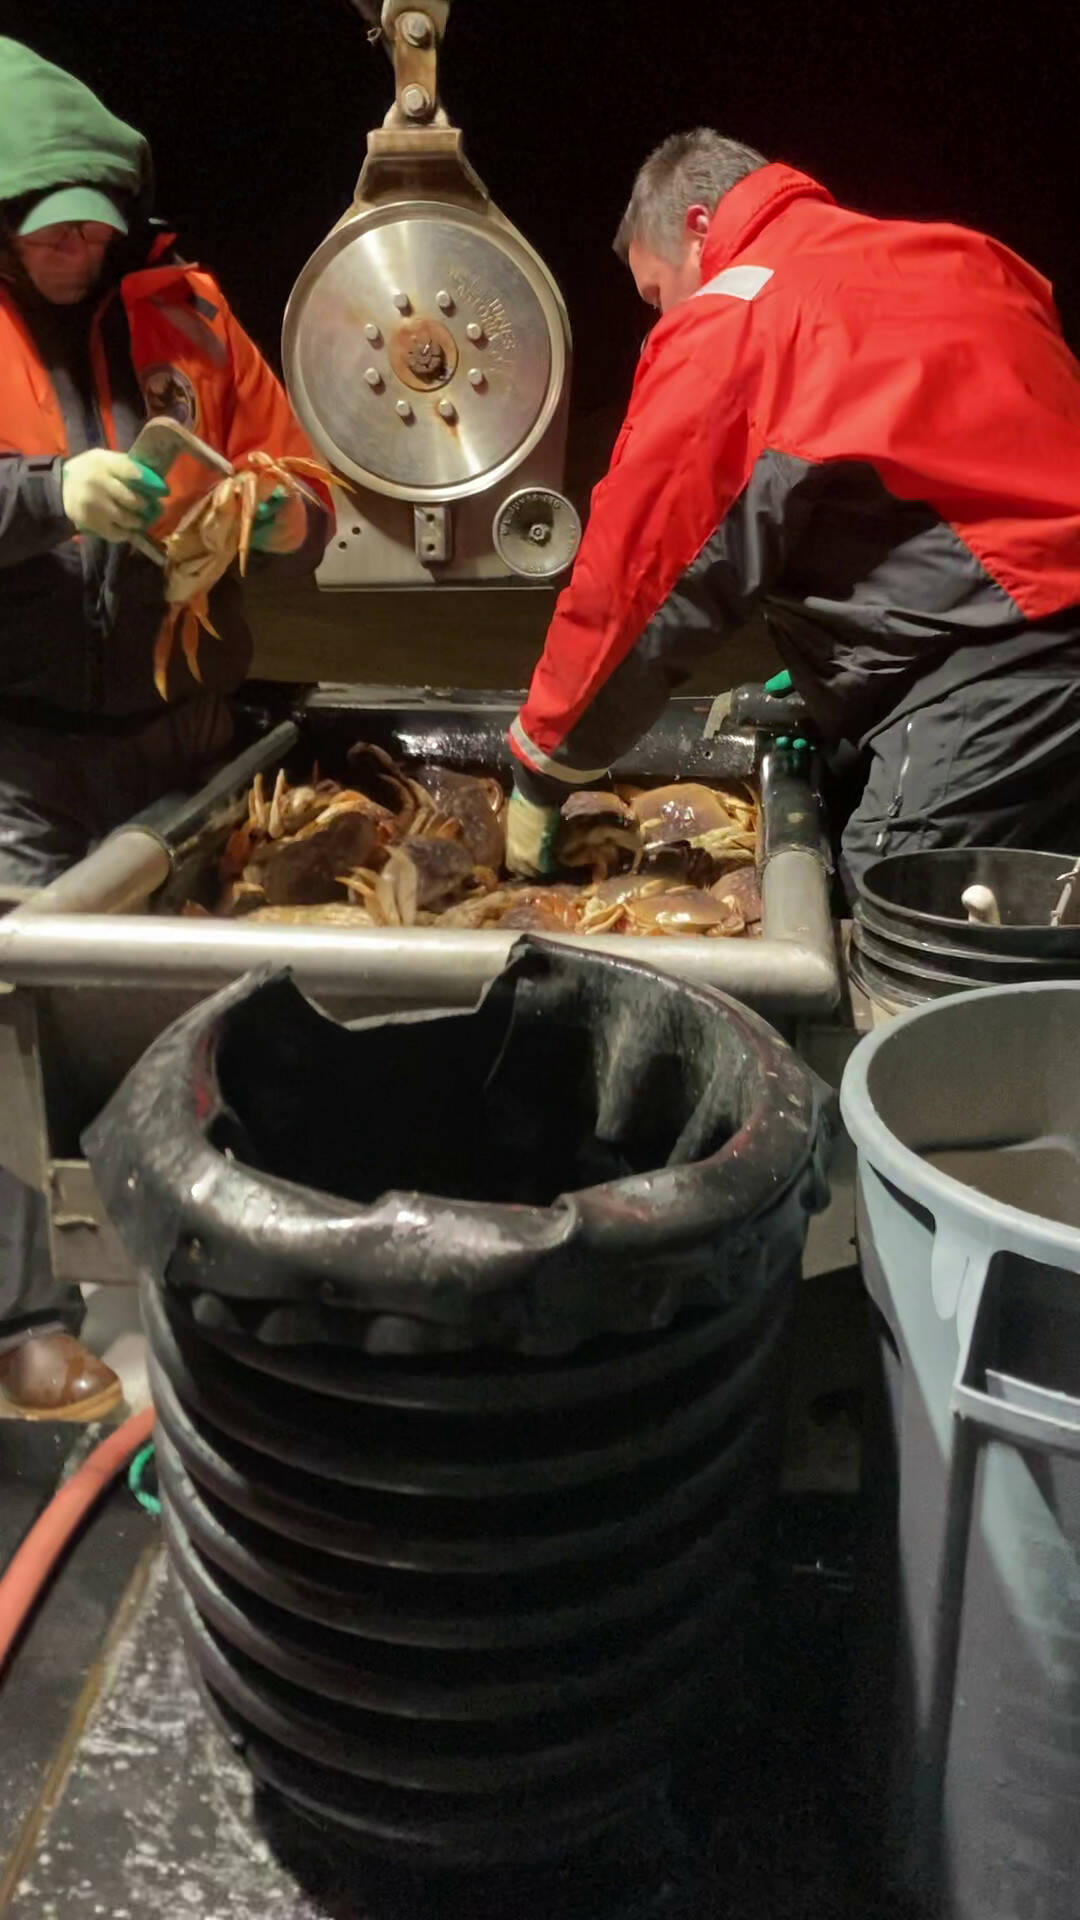 Clayton Parson, lead shellfish technician and John Deibert, shellfish technician with the Washington Department of Fish and Wildlife, examine a Dungeness crab.